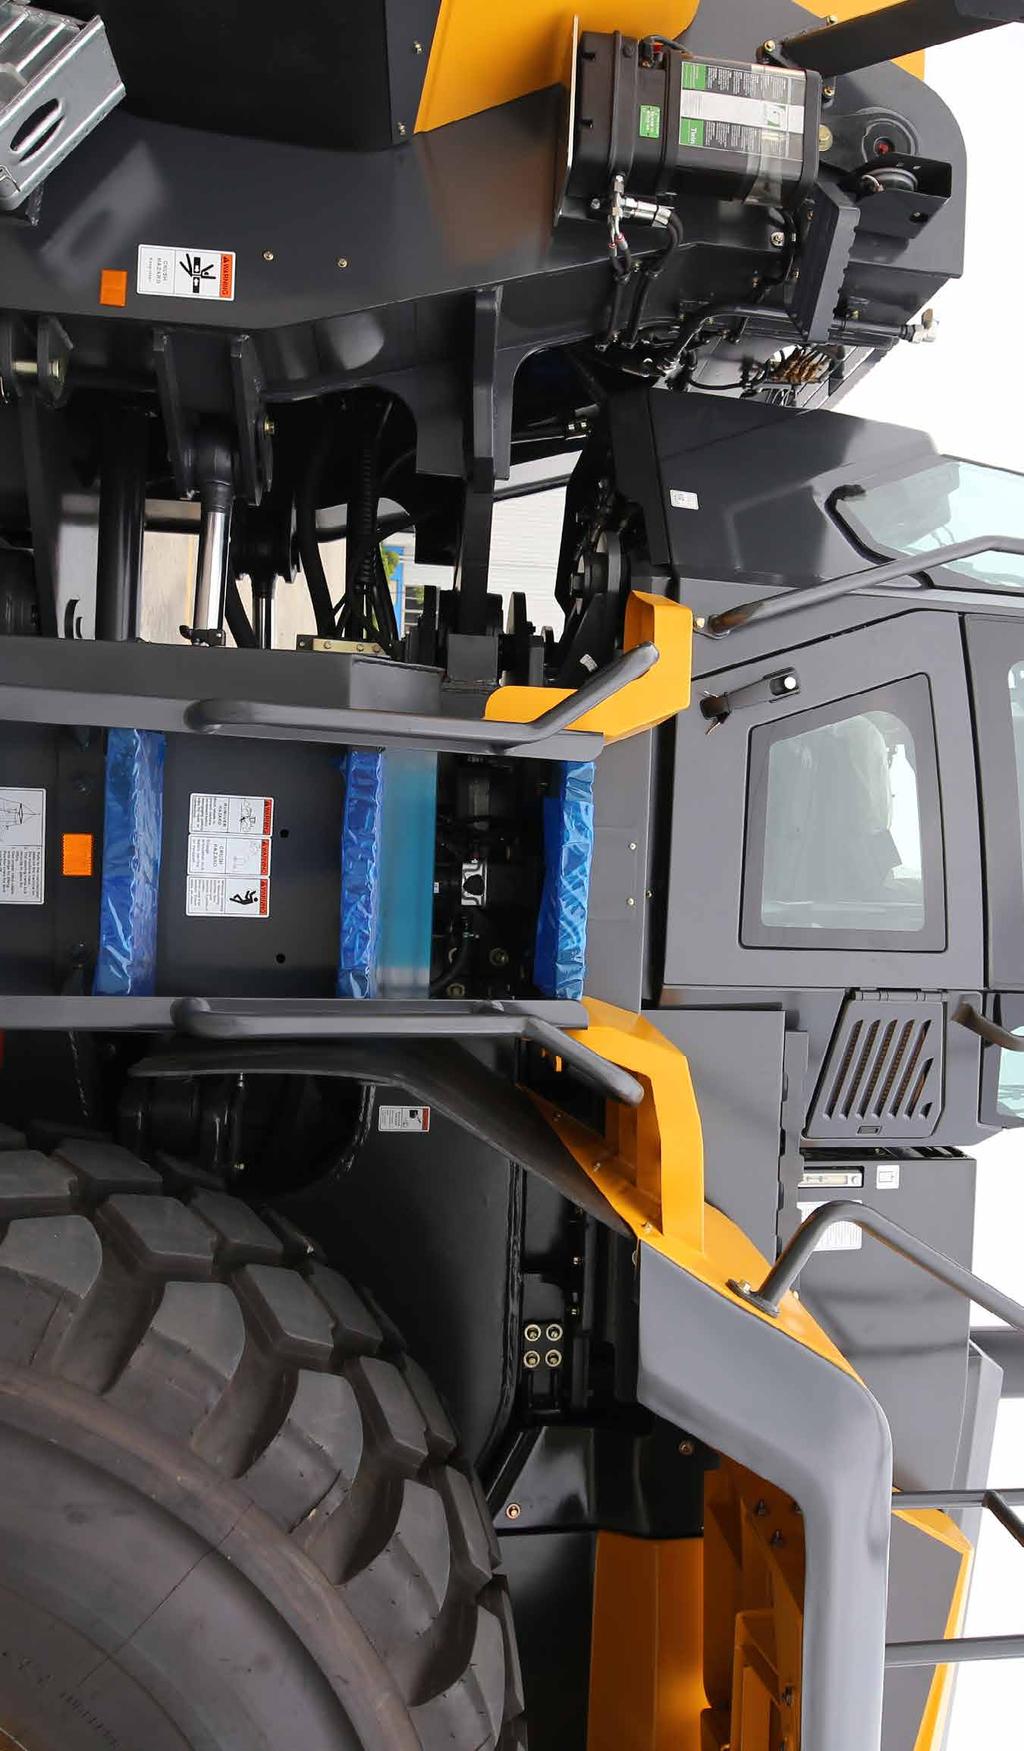 FOPS/ROPS CAB The 890H comes standard with a Rollover Protection System (ROPS) and Falling Object Protection System (FOPS) for extra